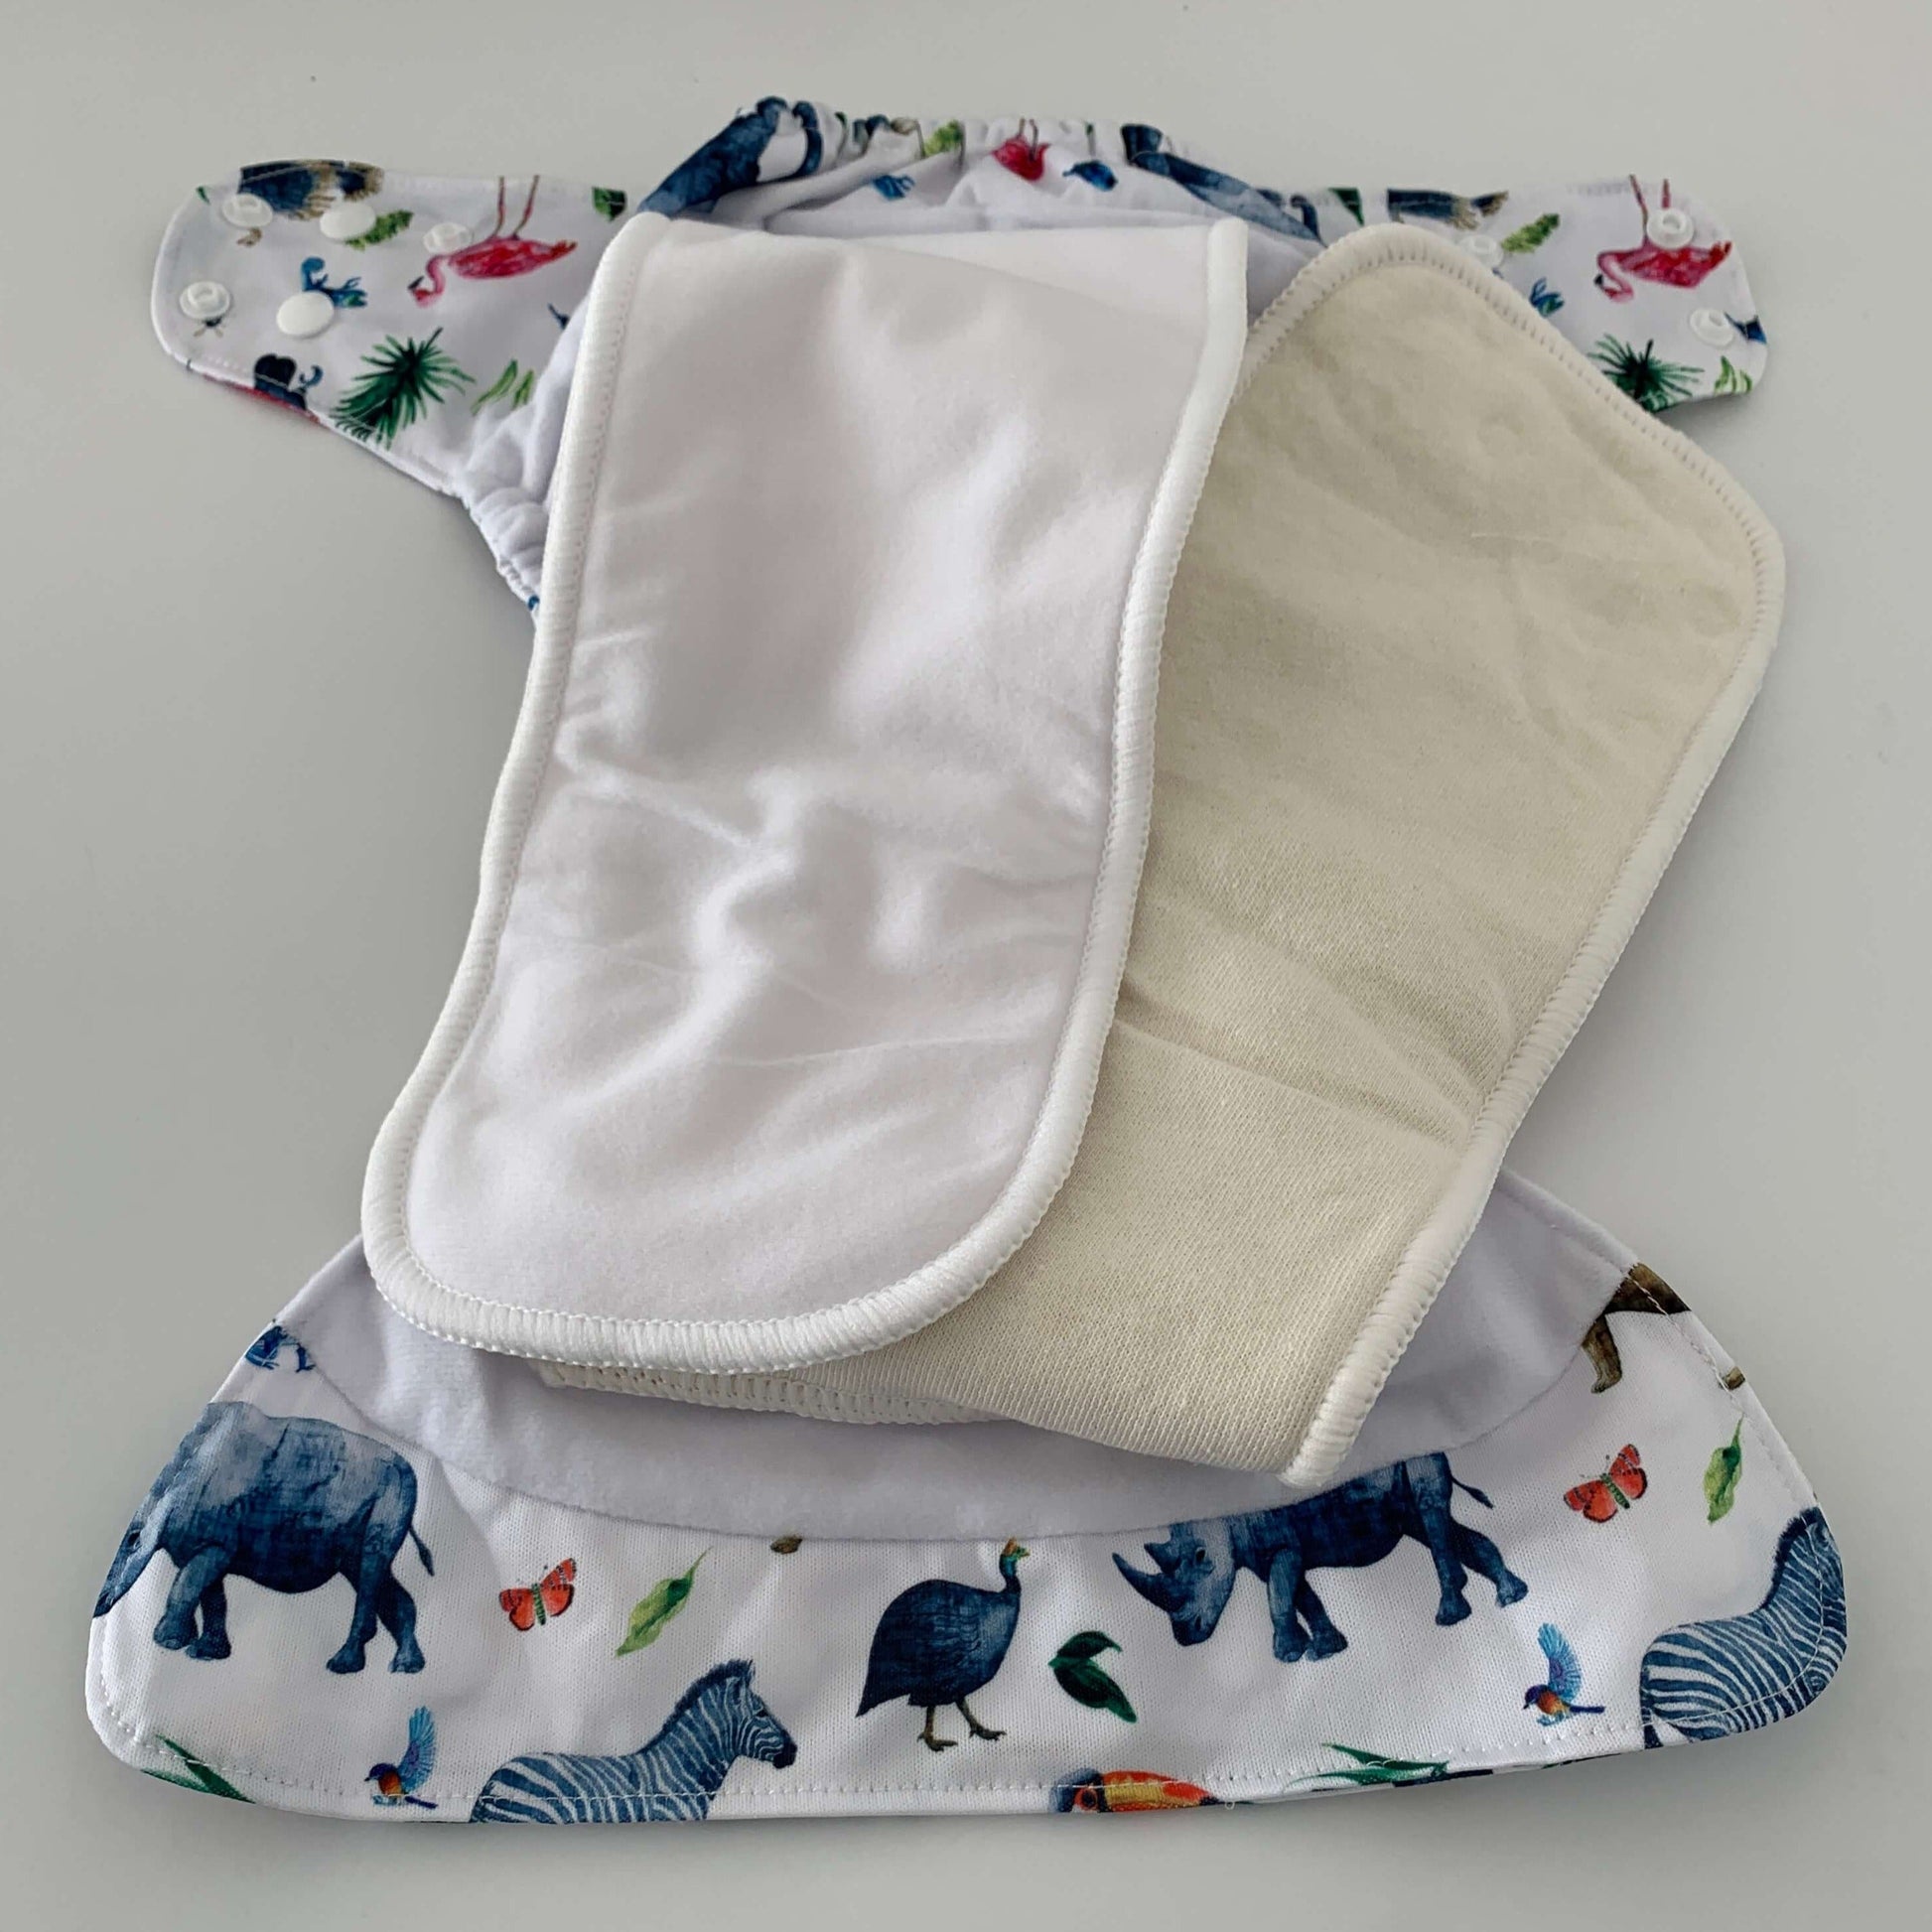 Bear & Moo Reusable Cloth Nappy in Little Red Tractor print | Luxe